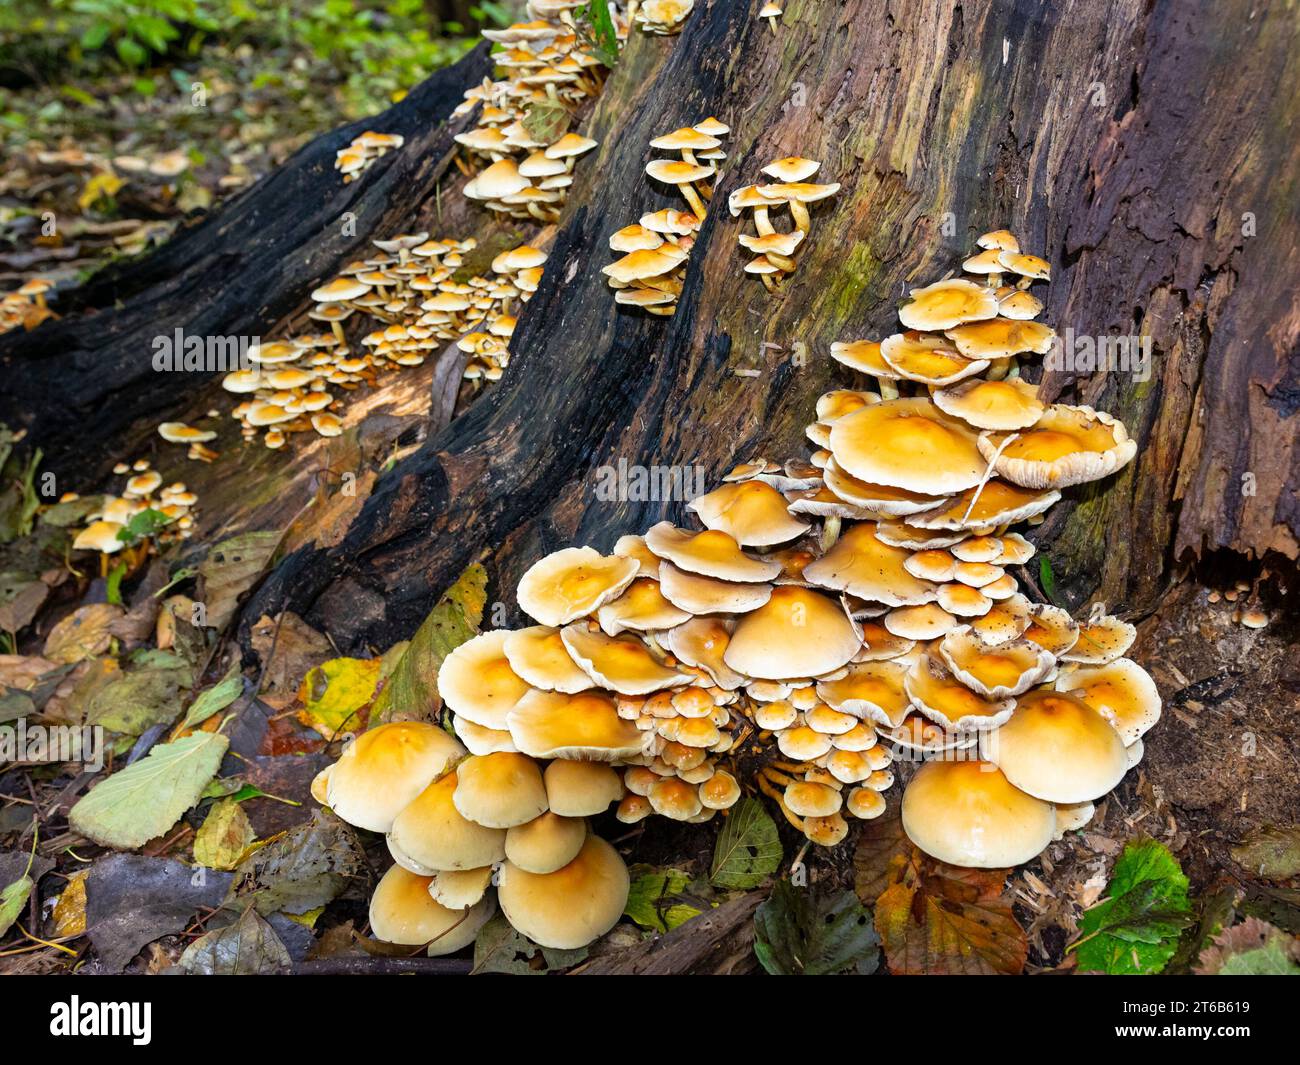 Many yellow mushrooms on the trunk of a tree Stock Photo